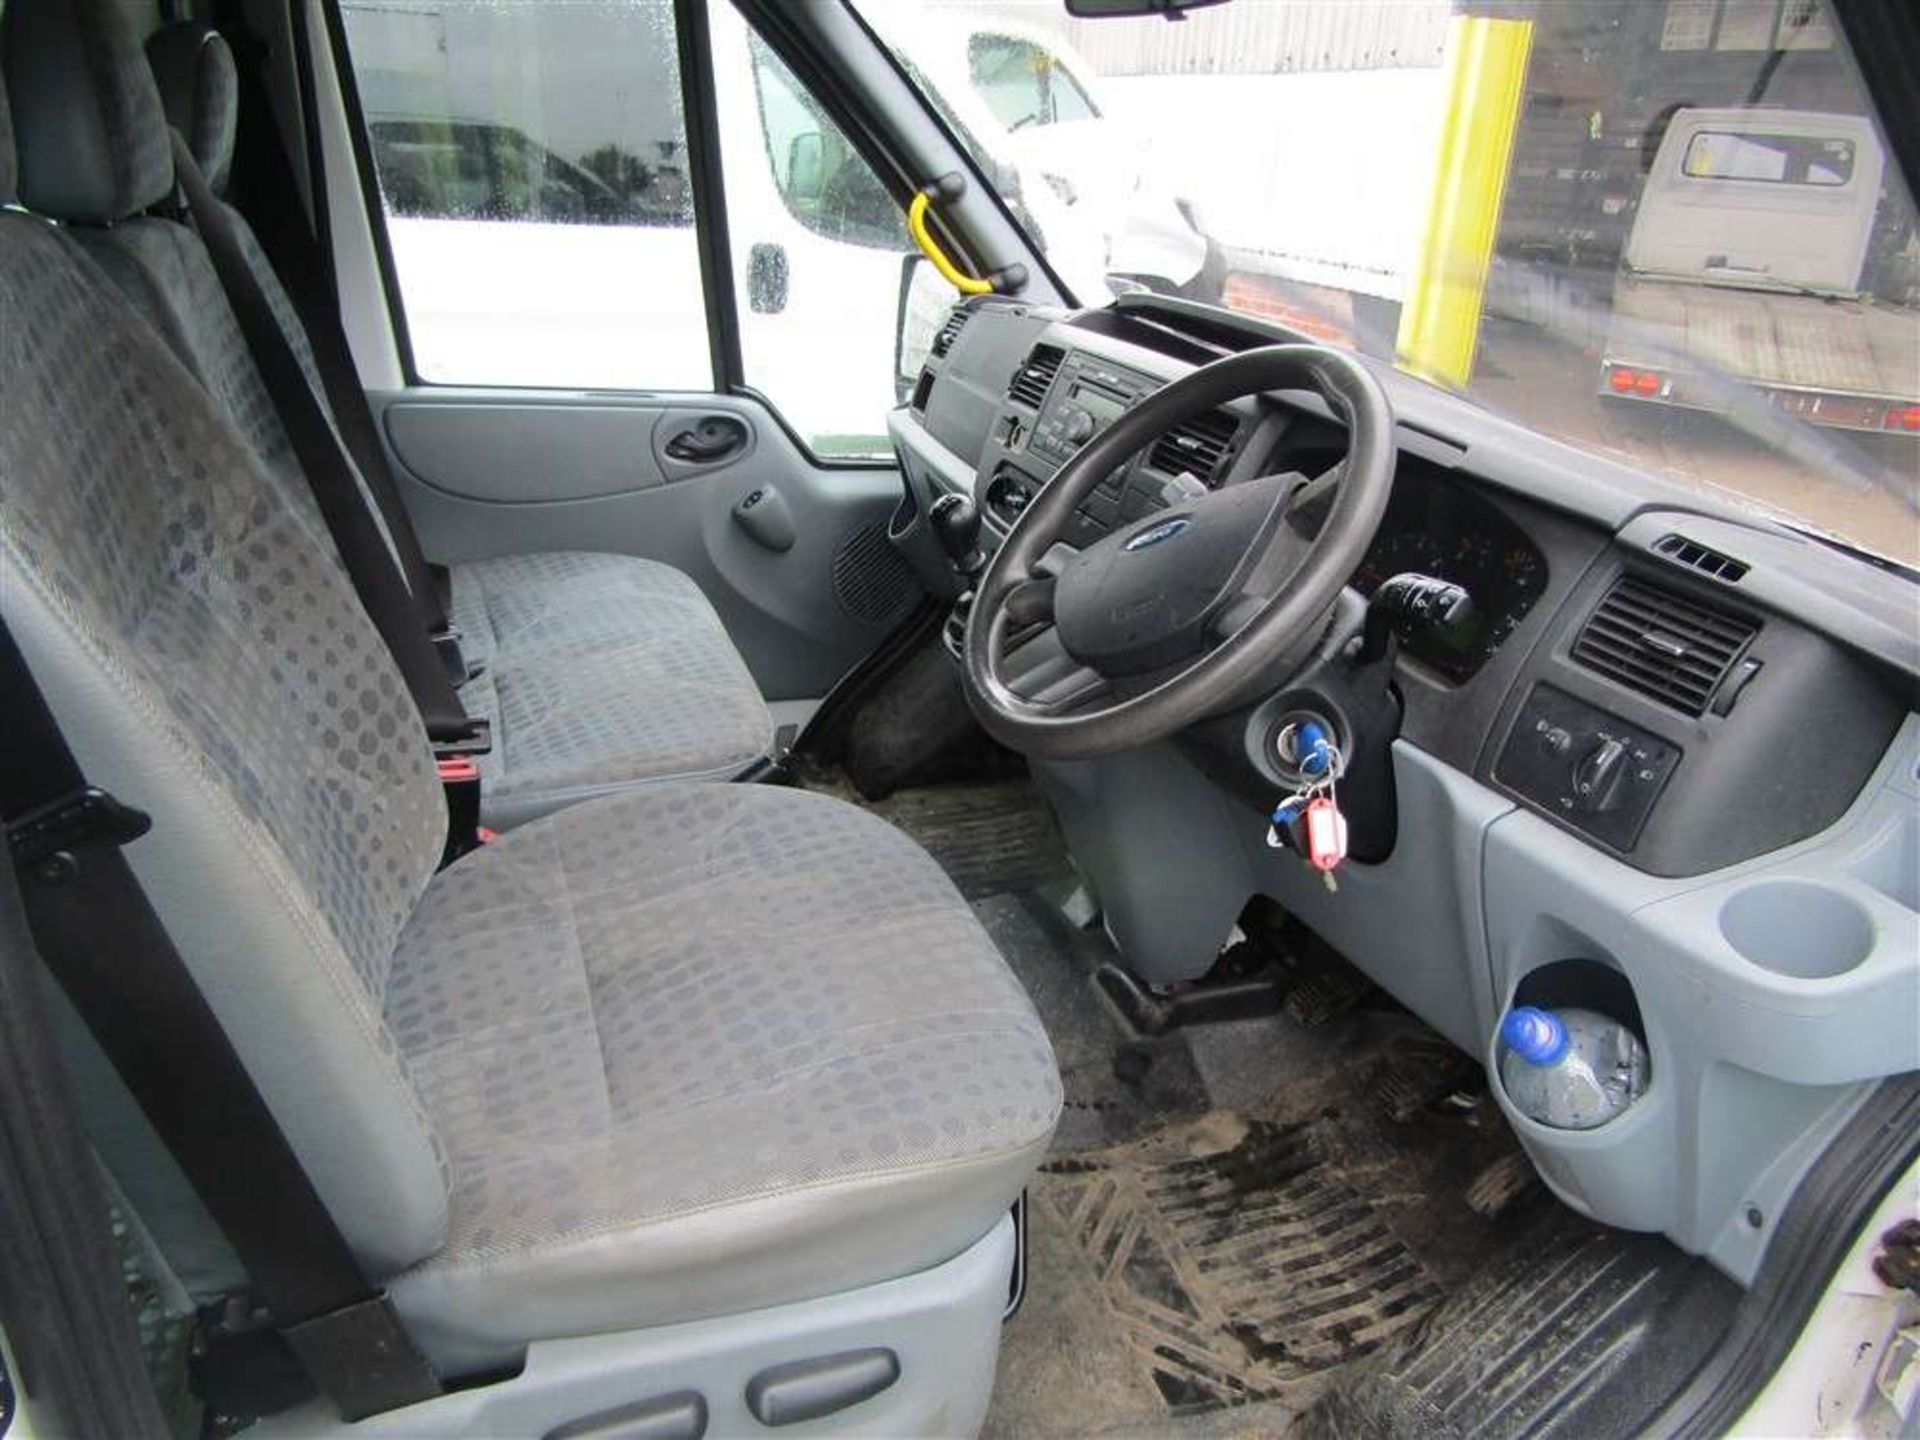 2008 58 reg Ford Transit 115 T430 17S RWD Minibus (Direct Council) - Image 6 of 7